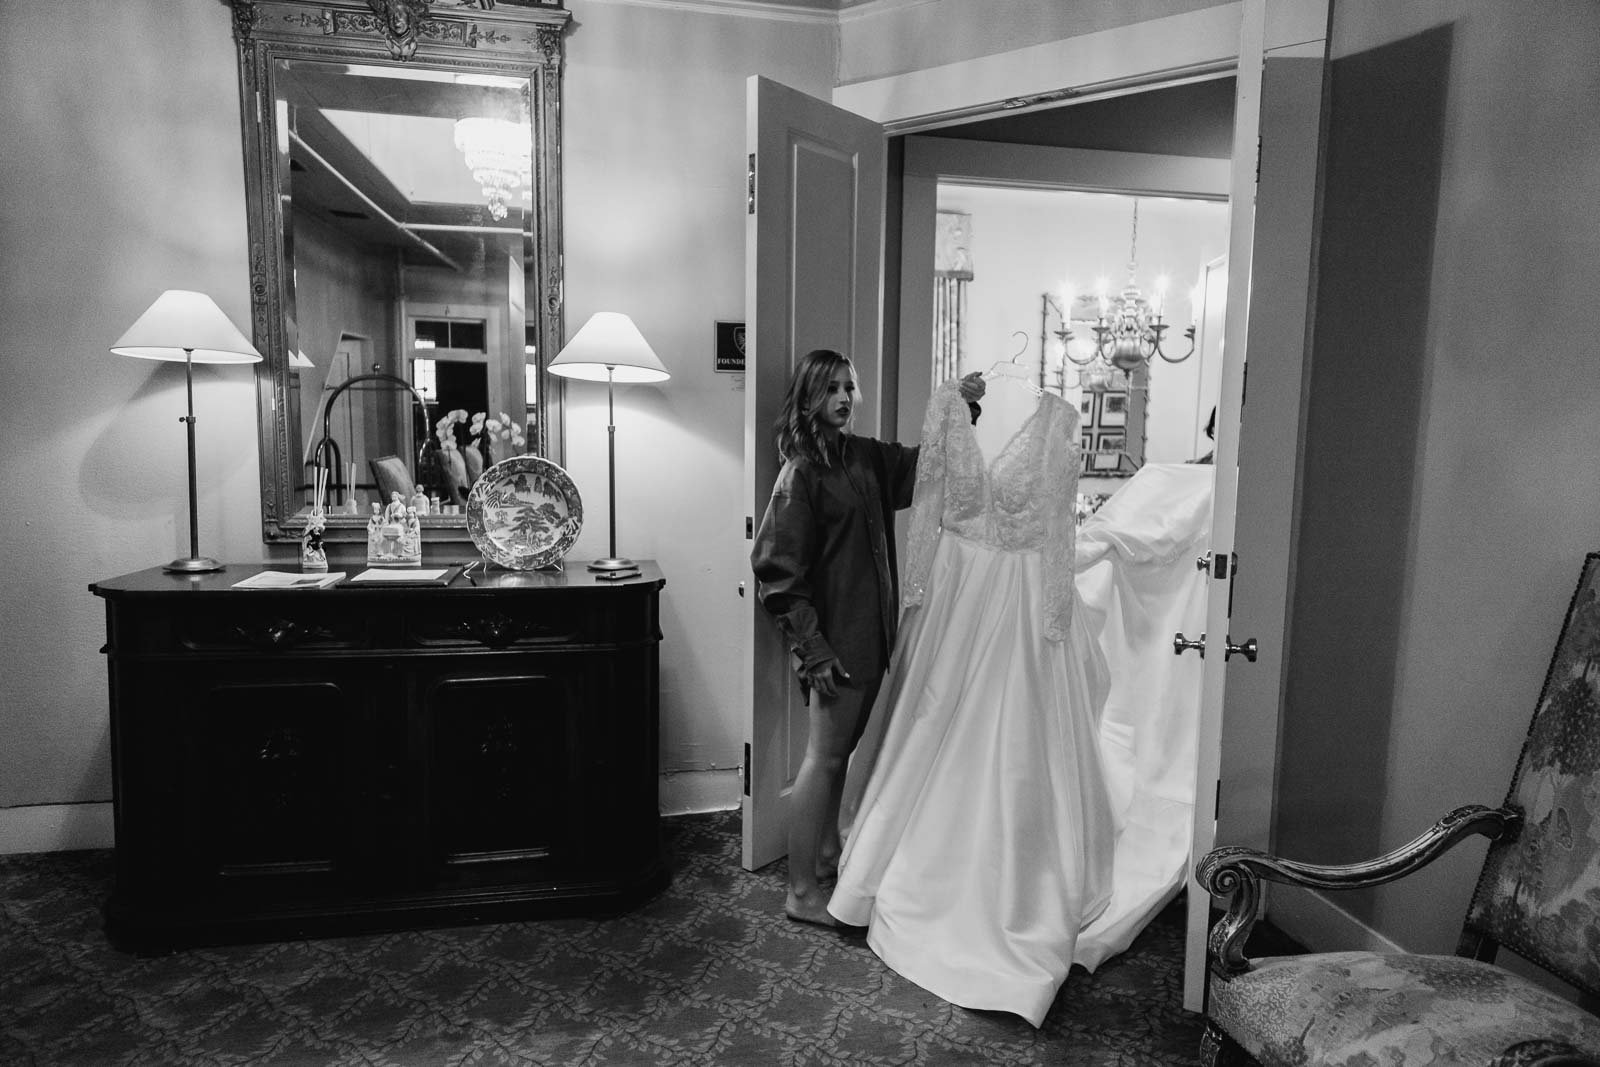 With help from the bridesmaids and they move the bridal dress from one room to the dressing room